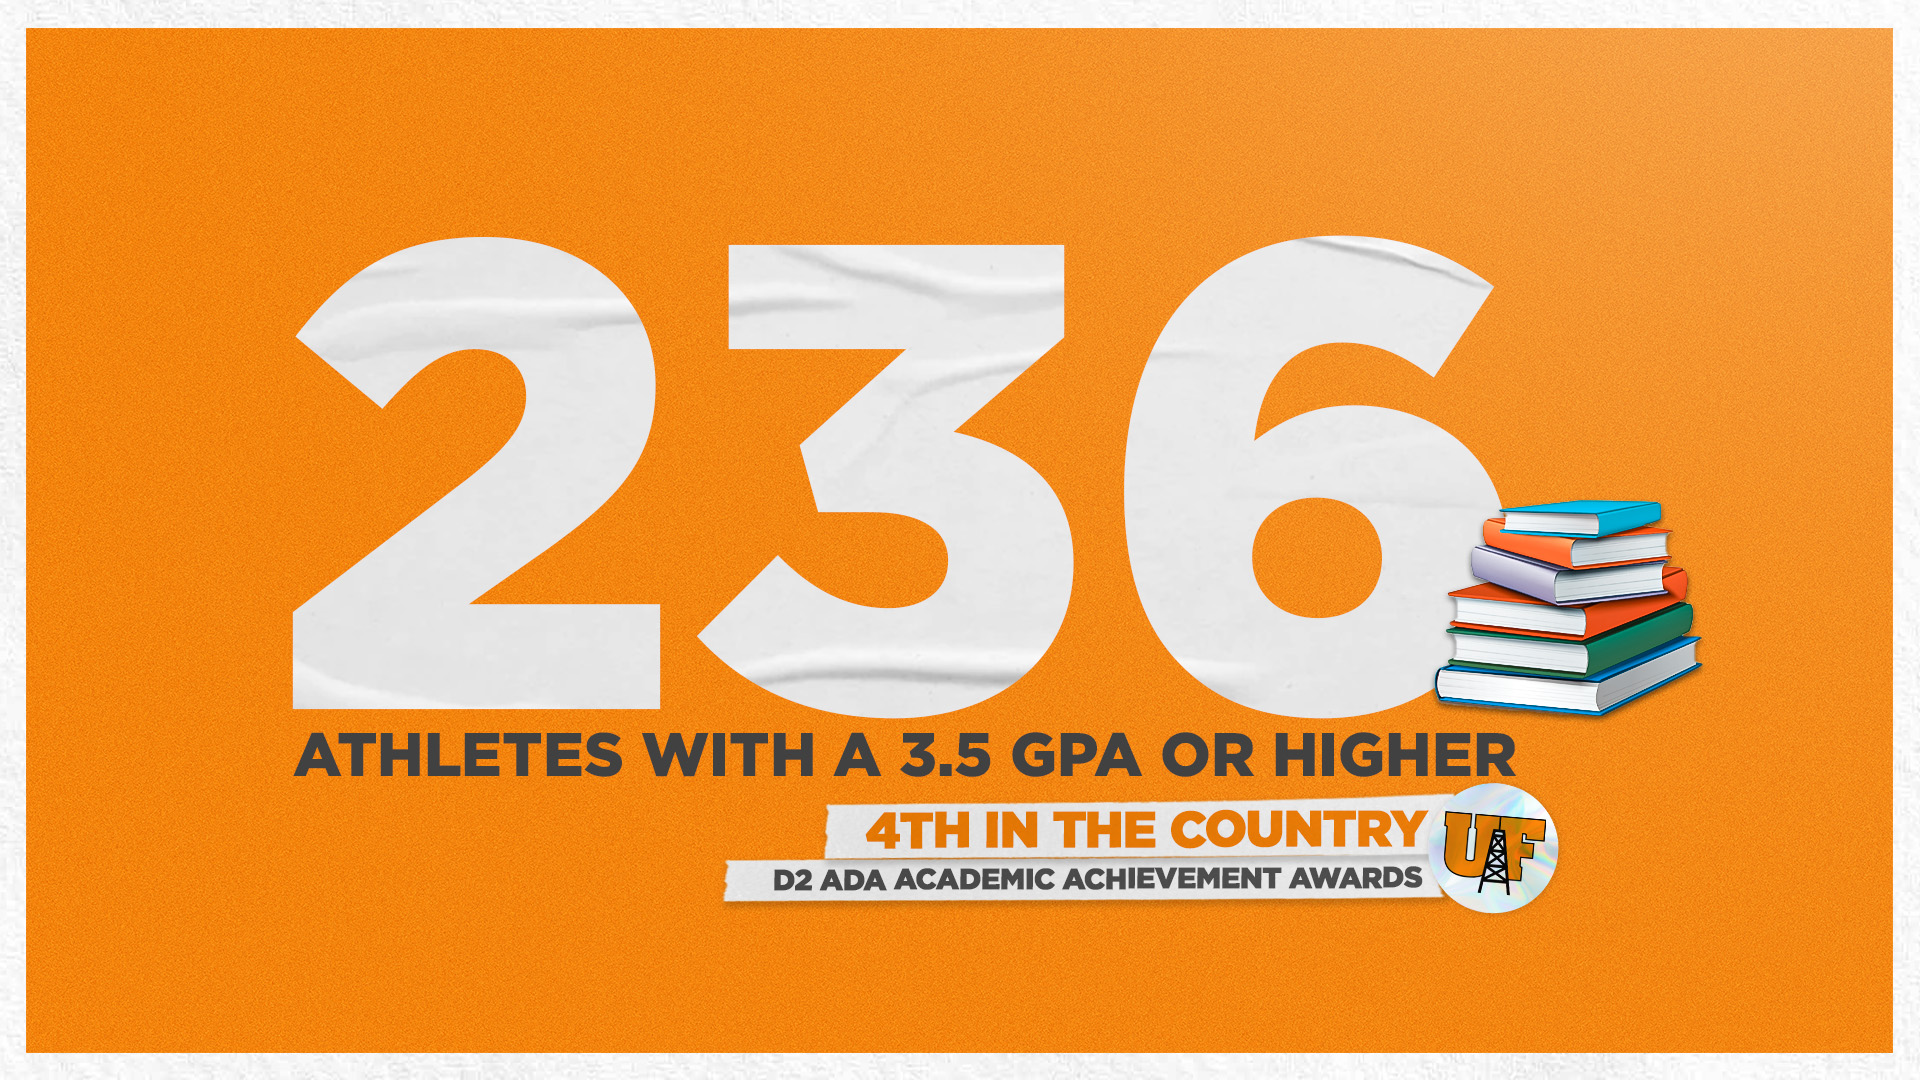 Findlay Finishes Fourth in the Country with 236 D2 ADA Academic Achievement Awards